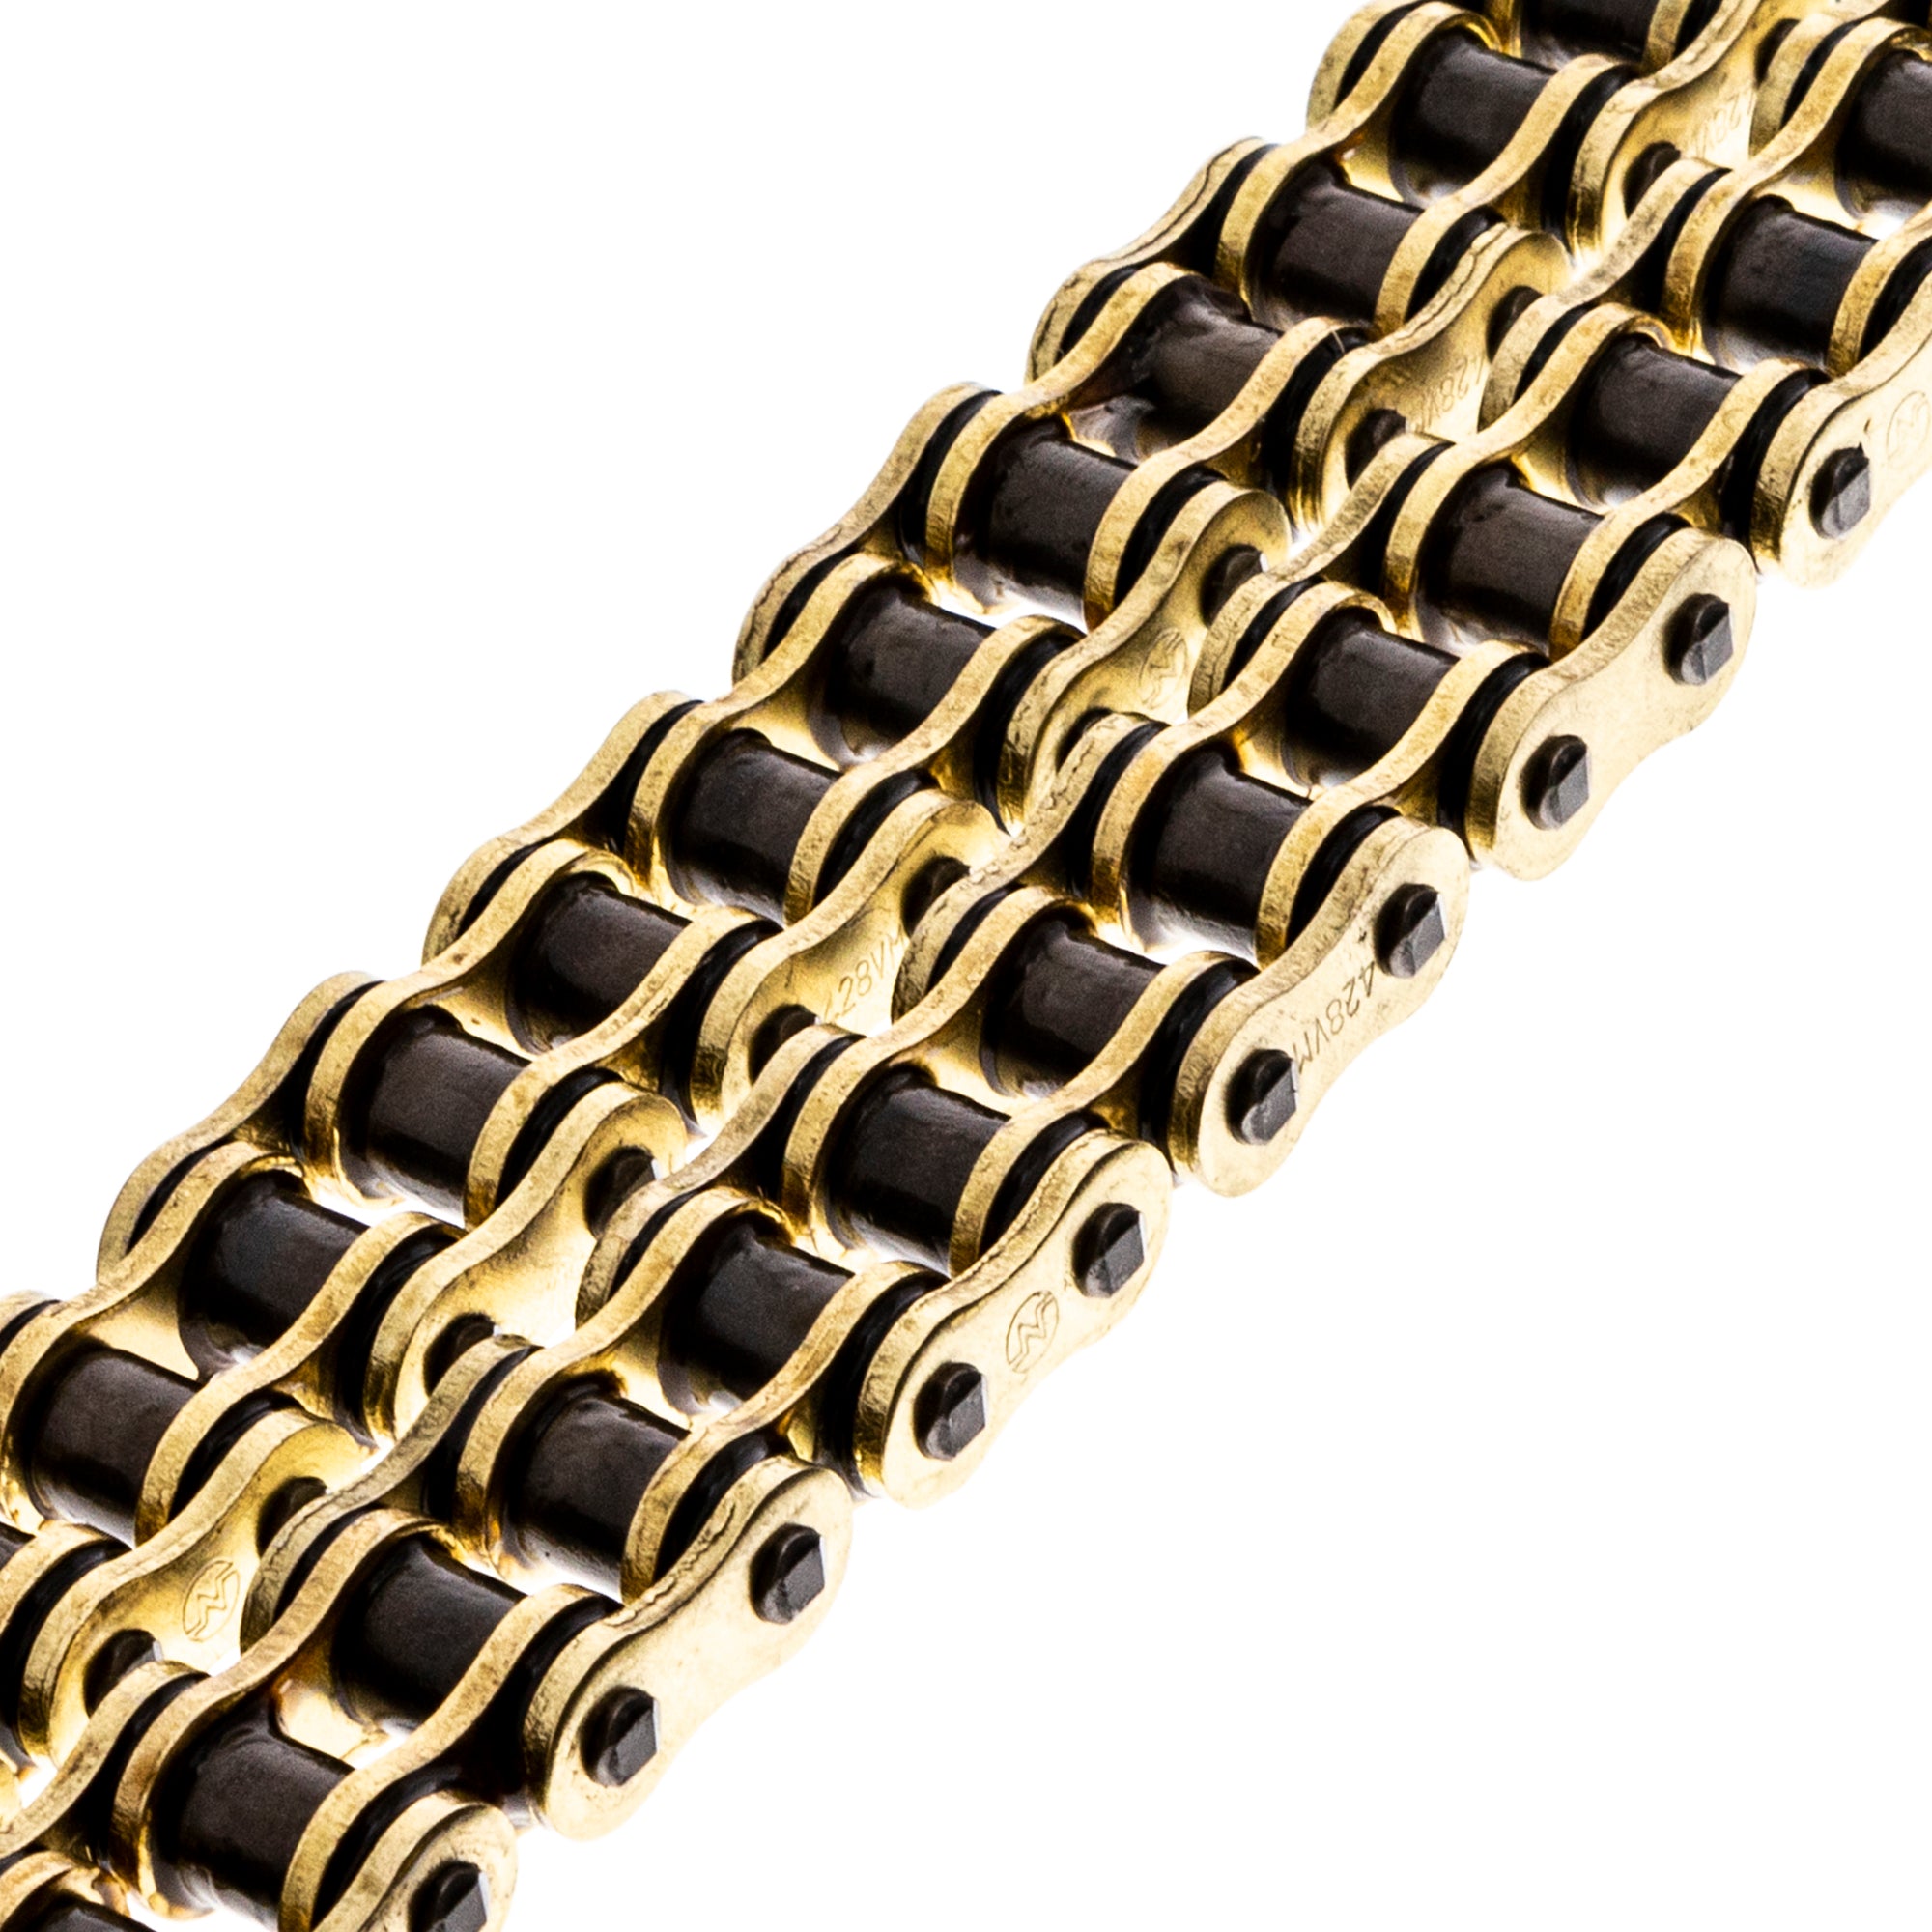 Gold X-Ring Chain 114 w/ Master Link for zOTHER YZ80 TS90 TS125 TS100 94580-30114-00 NICHE 519-CDC2573H